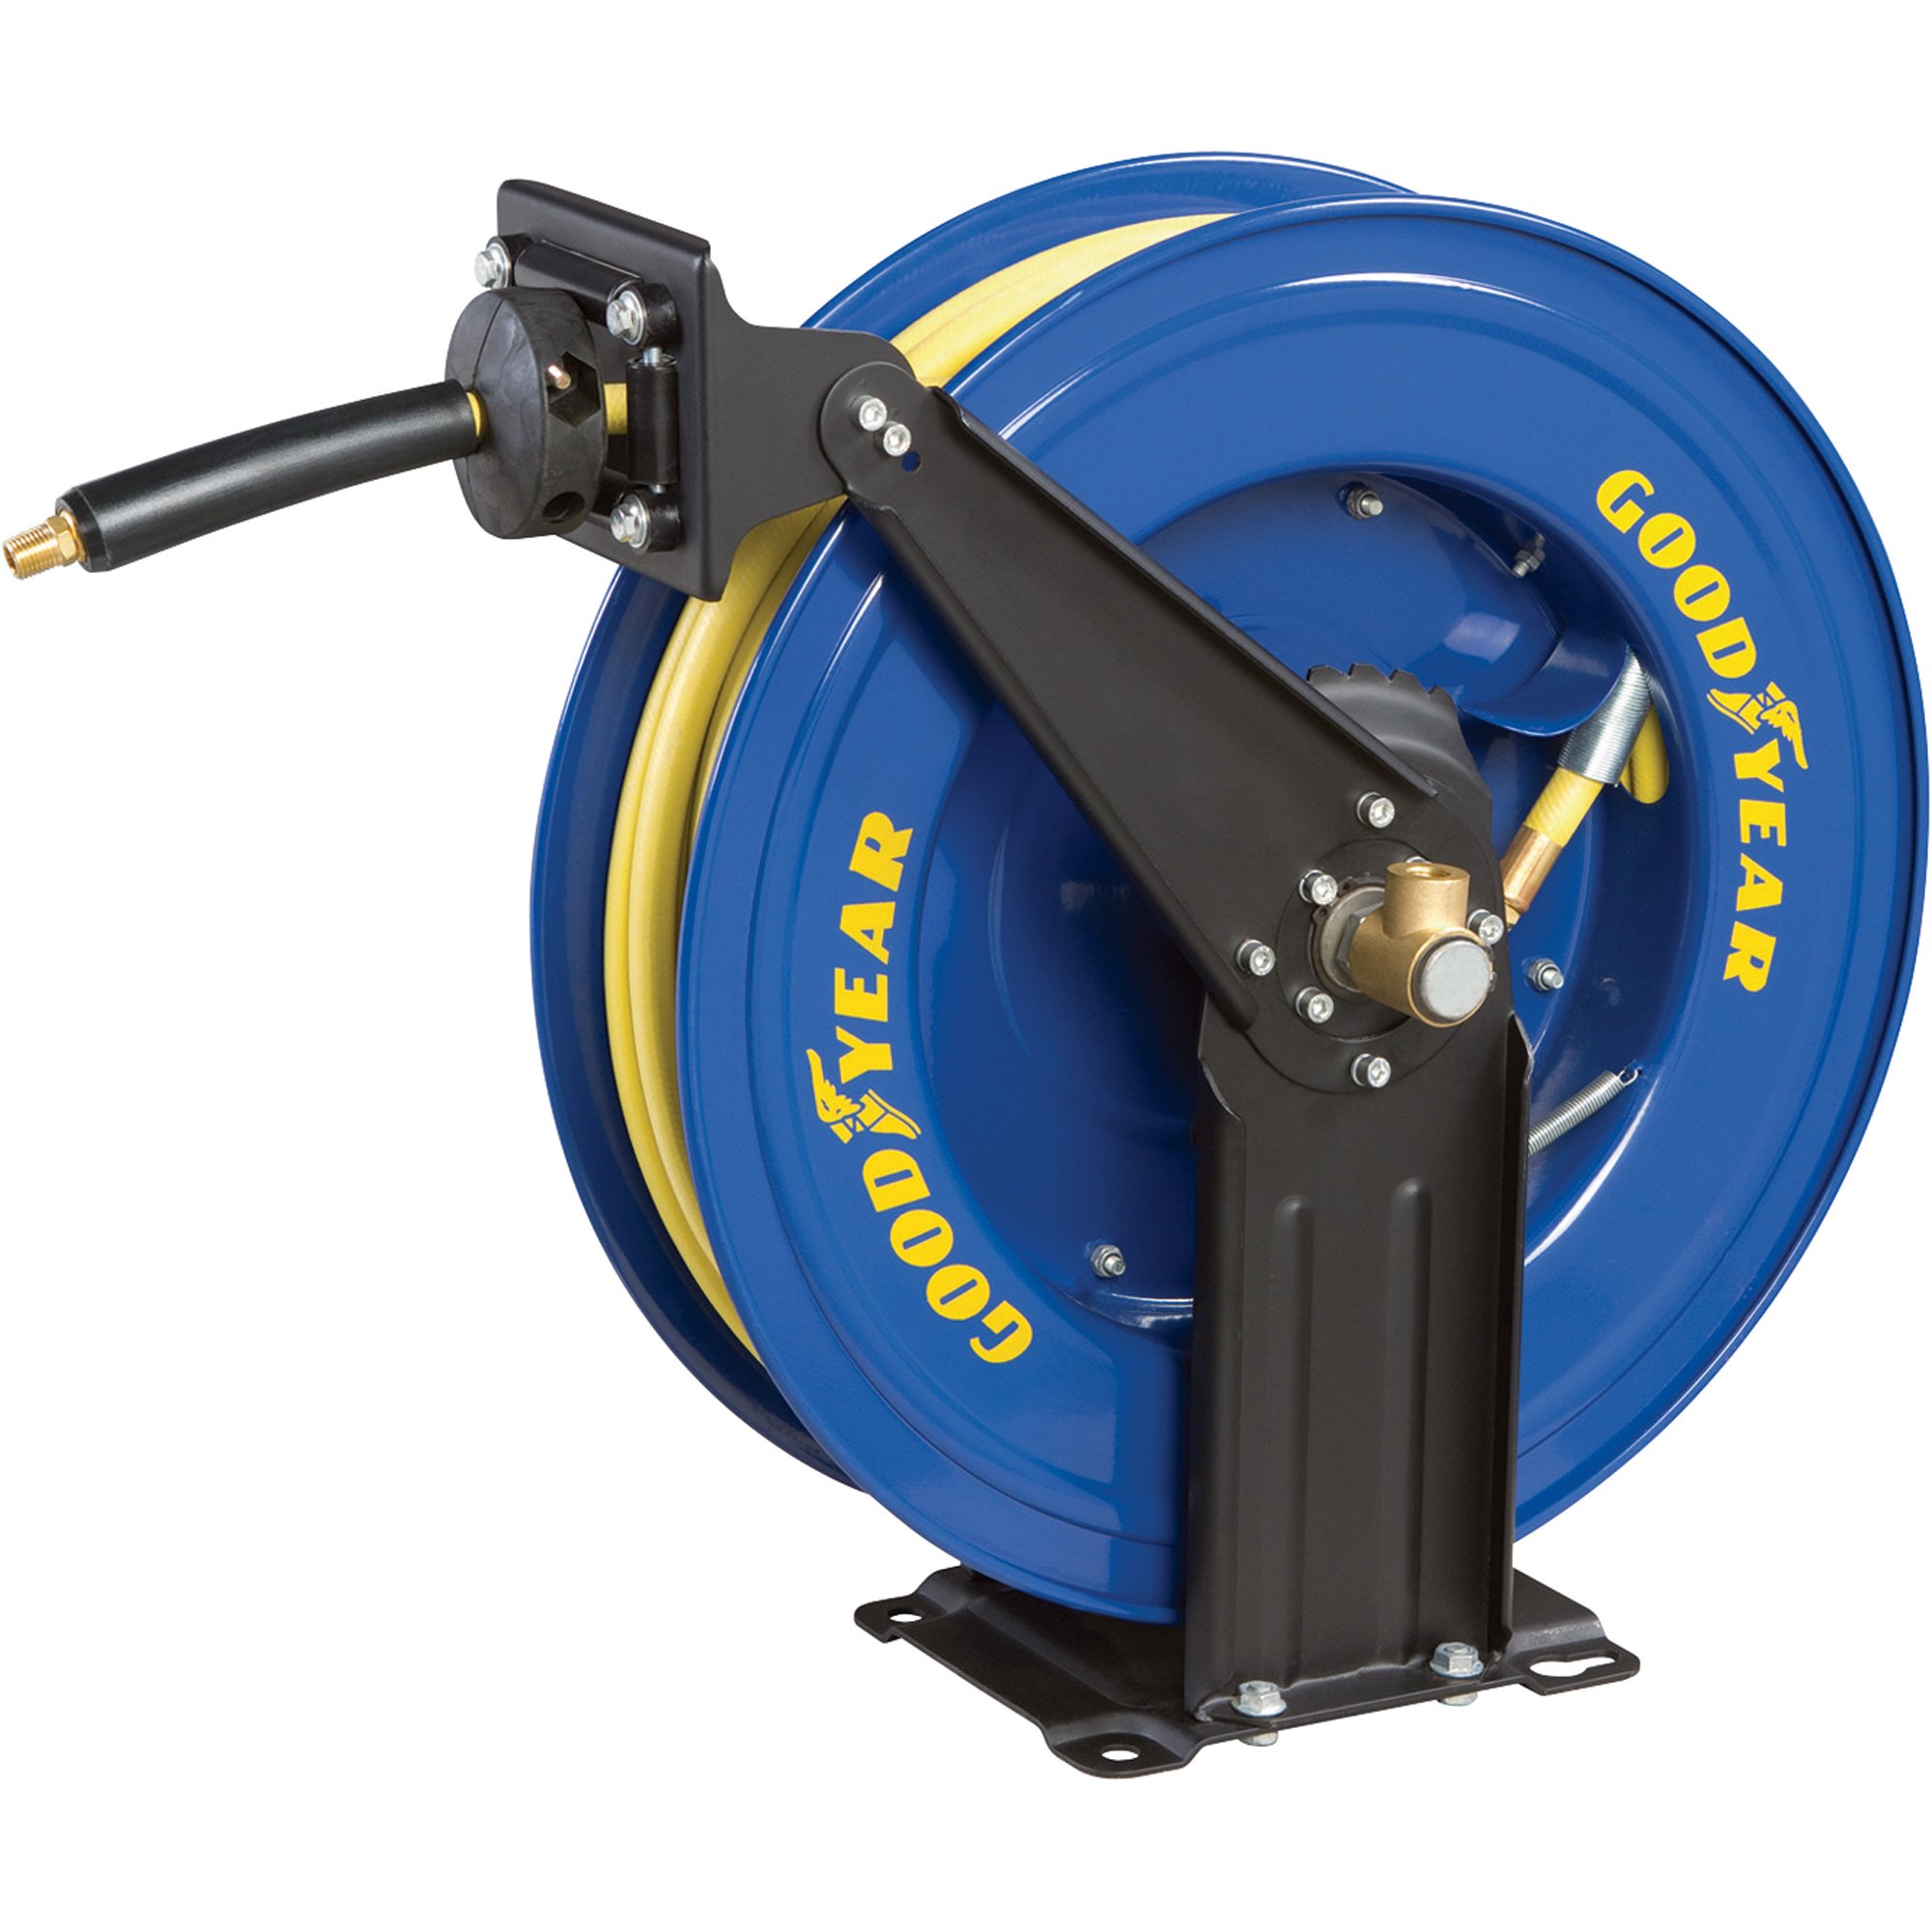 Goodyear L815153G Air Hose Reel Retractable 3/8 X 50Ft Commercial